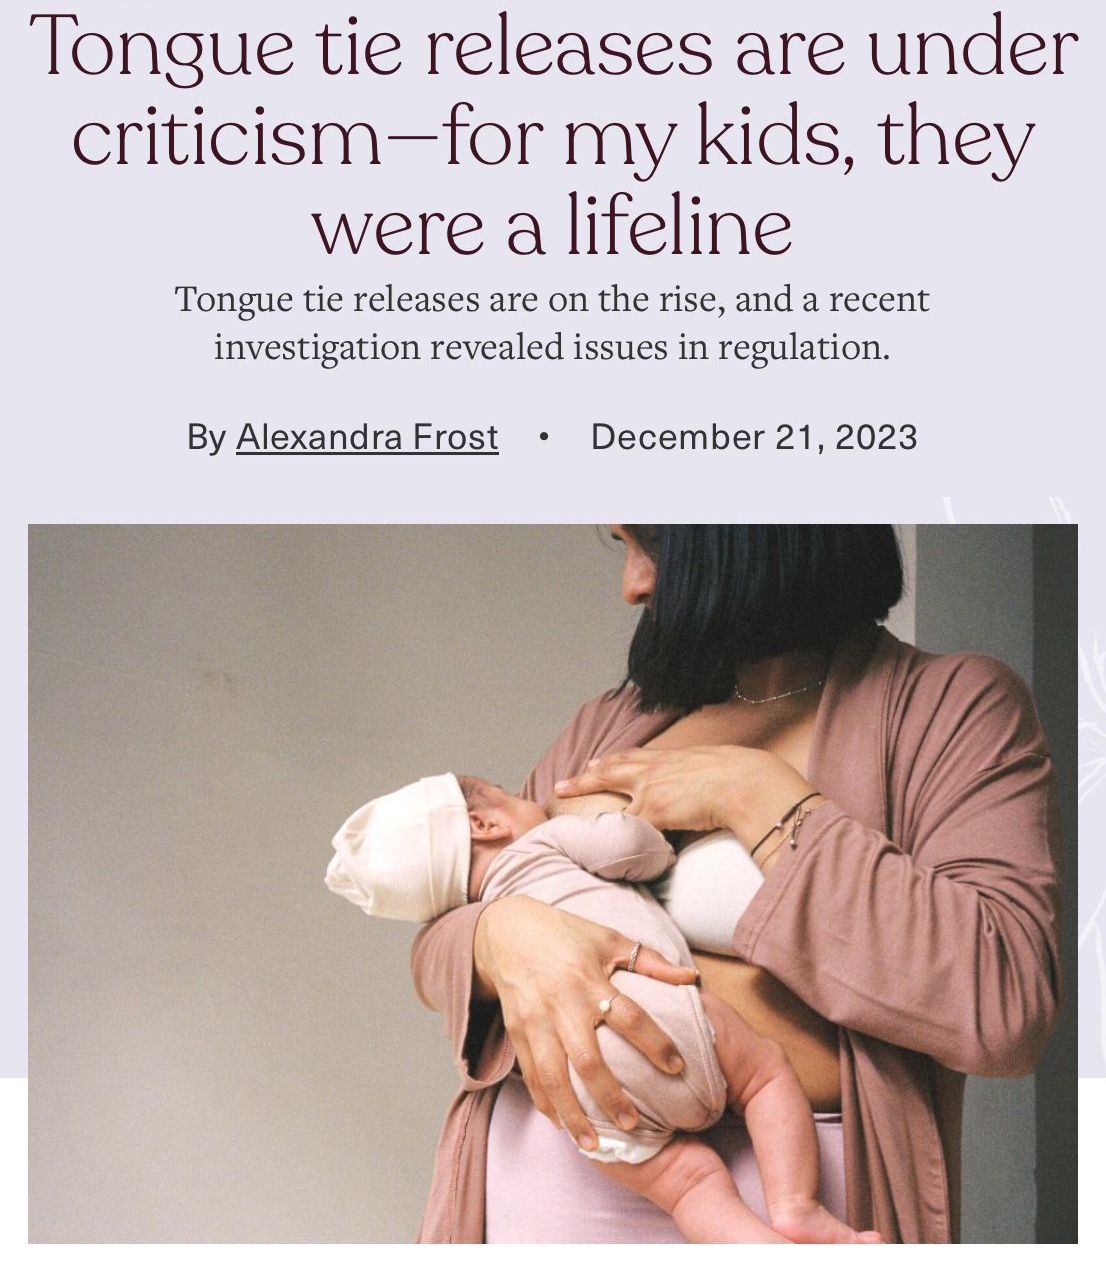 a woman is holding a baby in her arms and the caption says tongue tie releases are under criticism